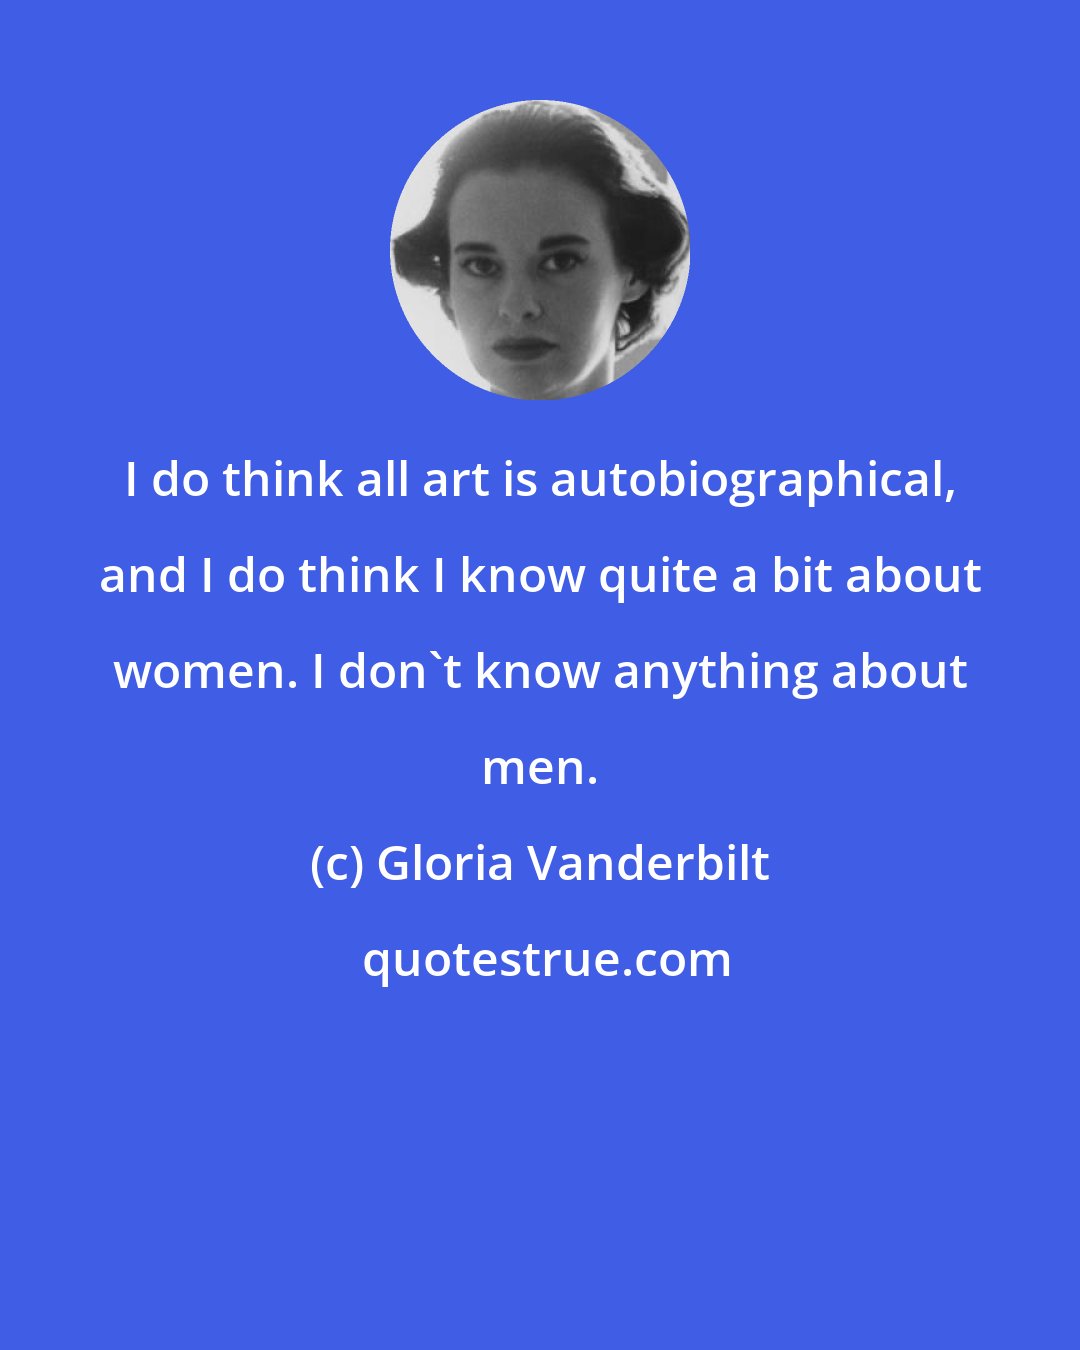 Gloria Vanderbilt: I do think all art is autobiographical, and I do think I know quite a bit about women. I don't know anything about men.